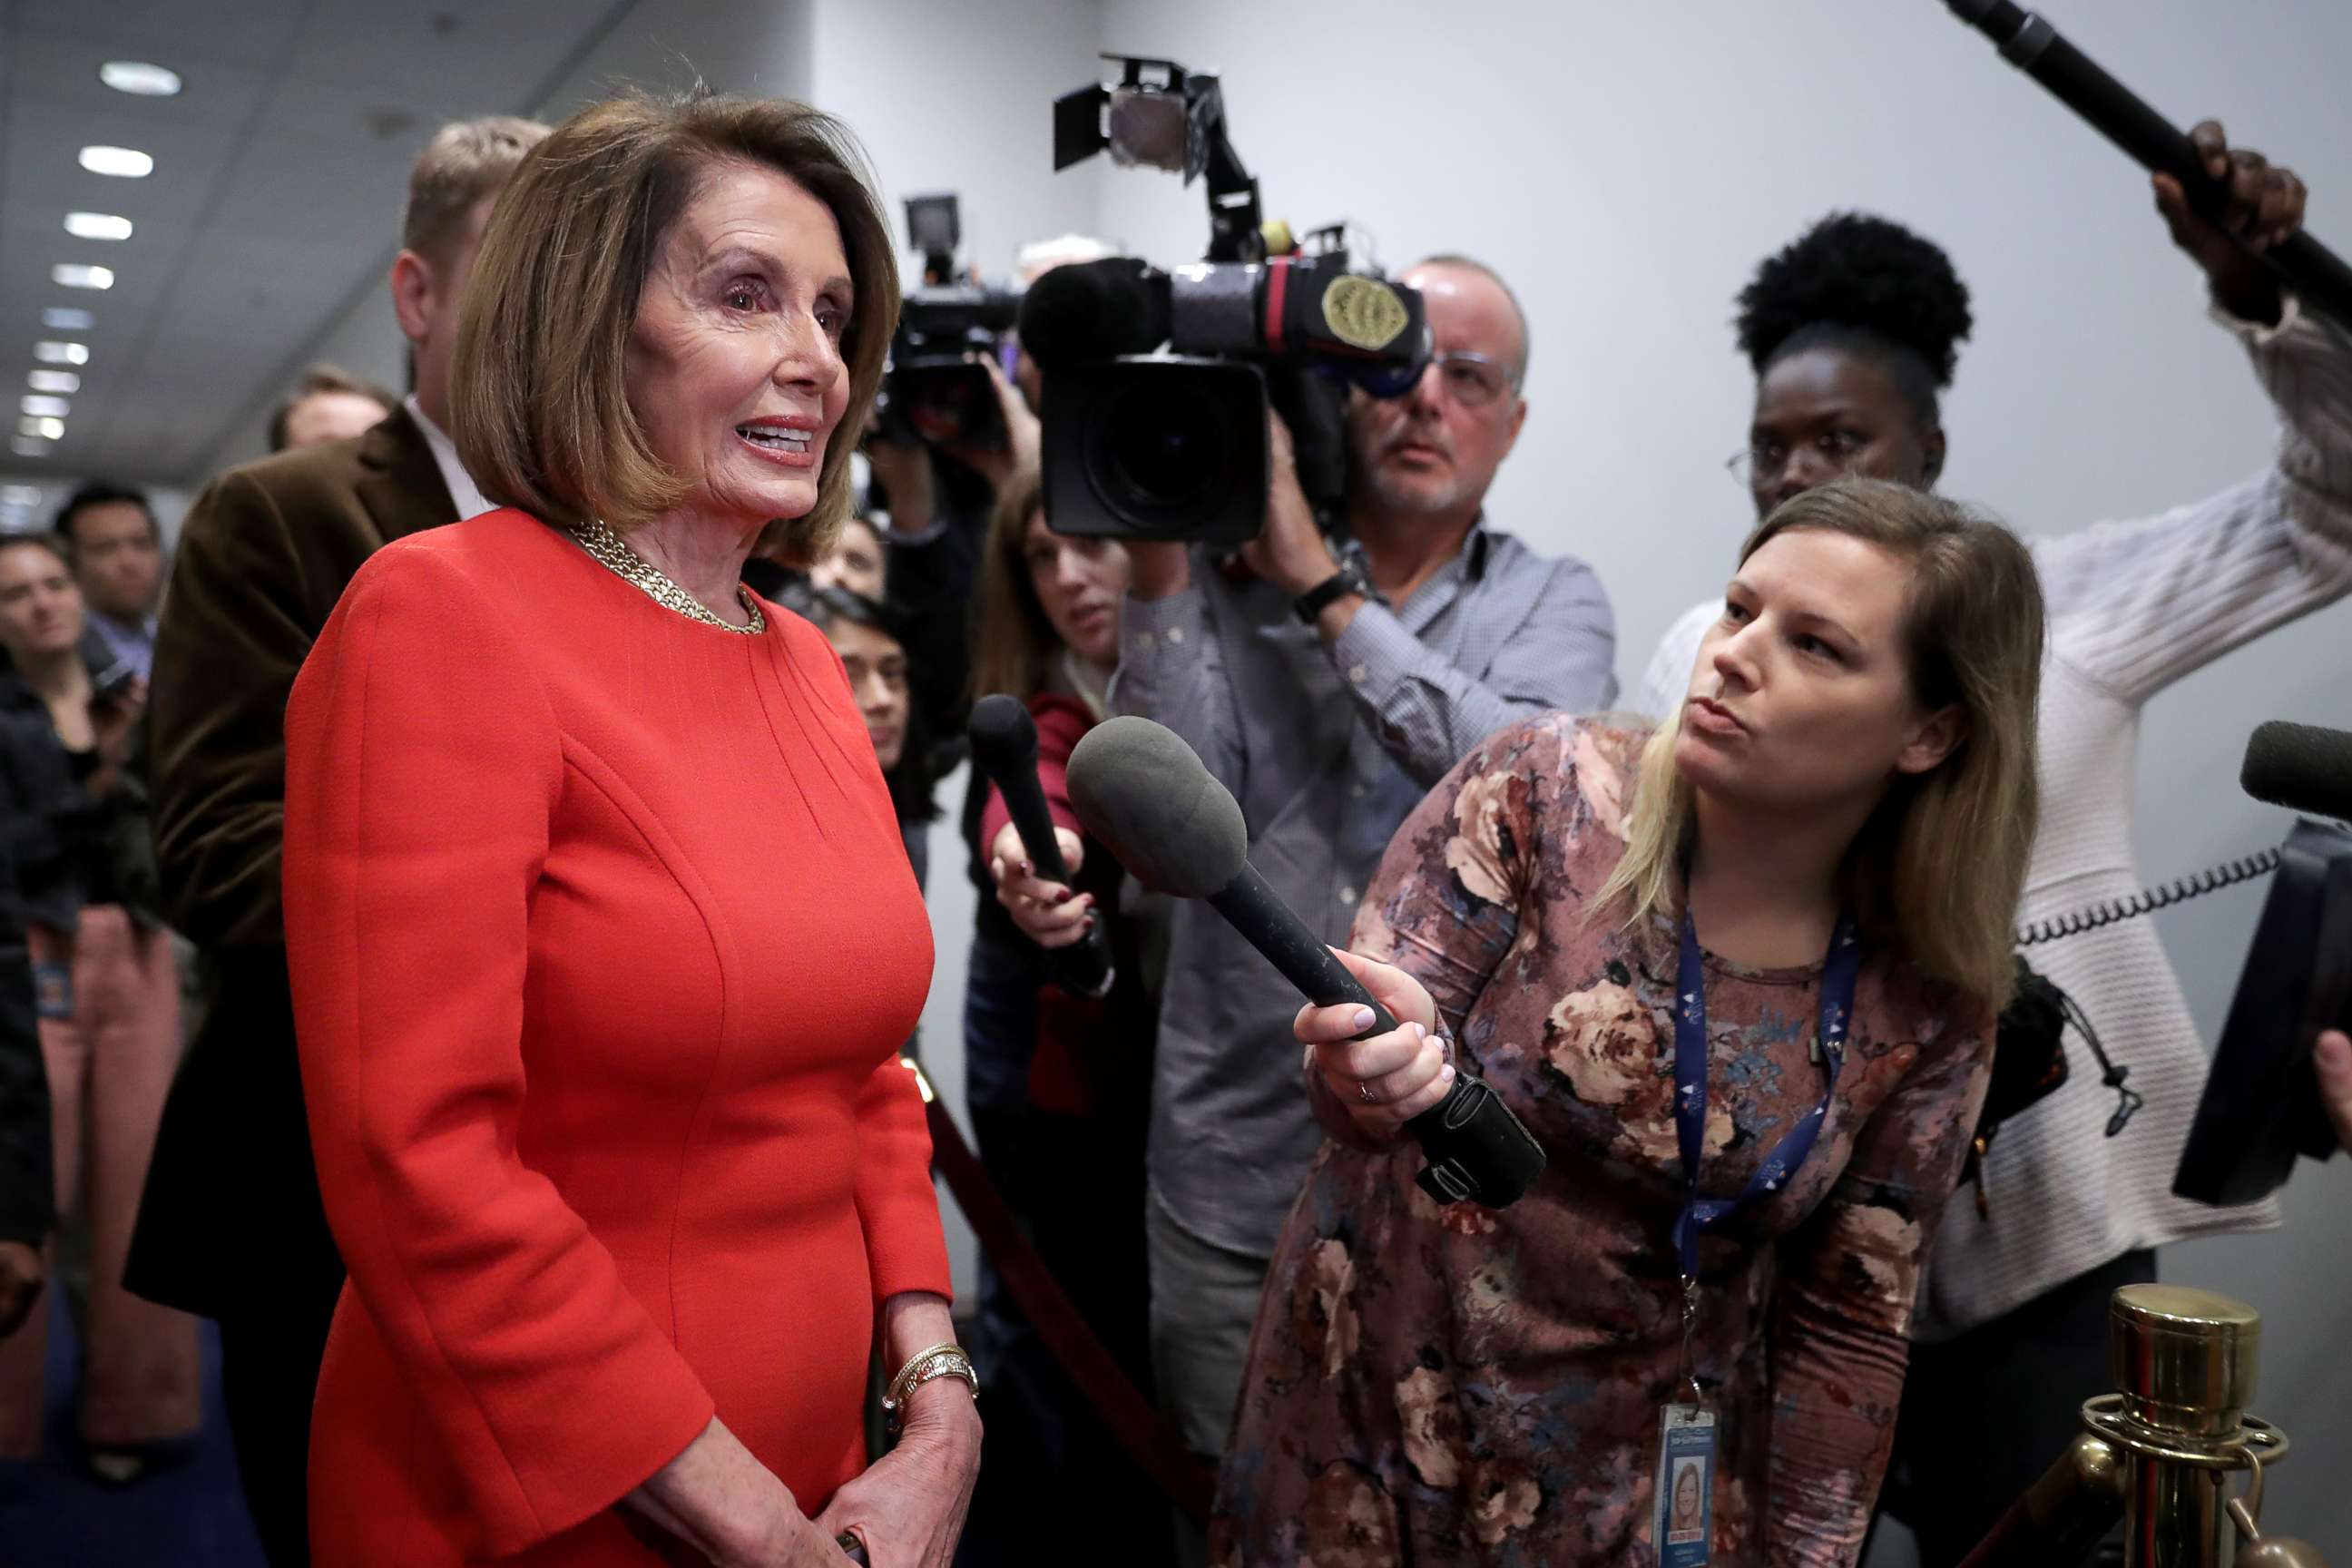 PHOTO: House Minority Leader Nancy Pelosi talks to journalists before heading into a Democratic caucus meeting at the U.S. Capitol Visitors Center, Nov. 14, 2018, in Washington, DC.